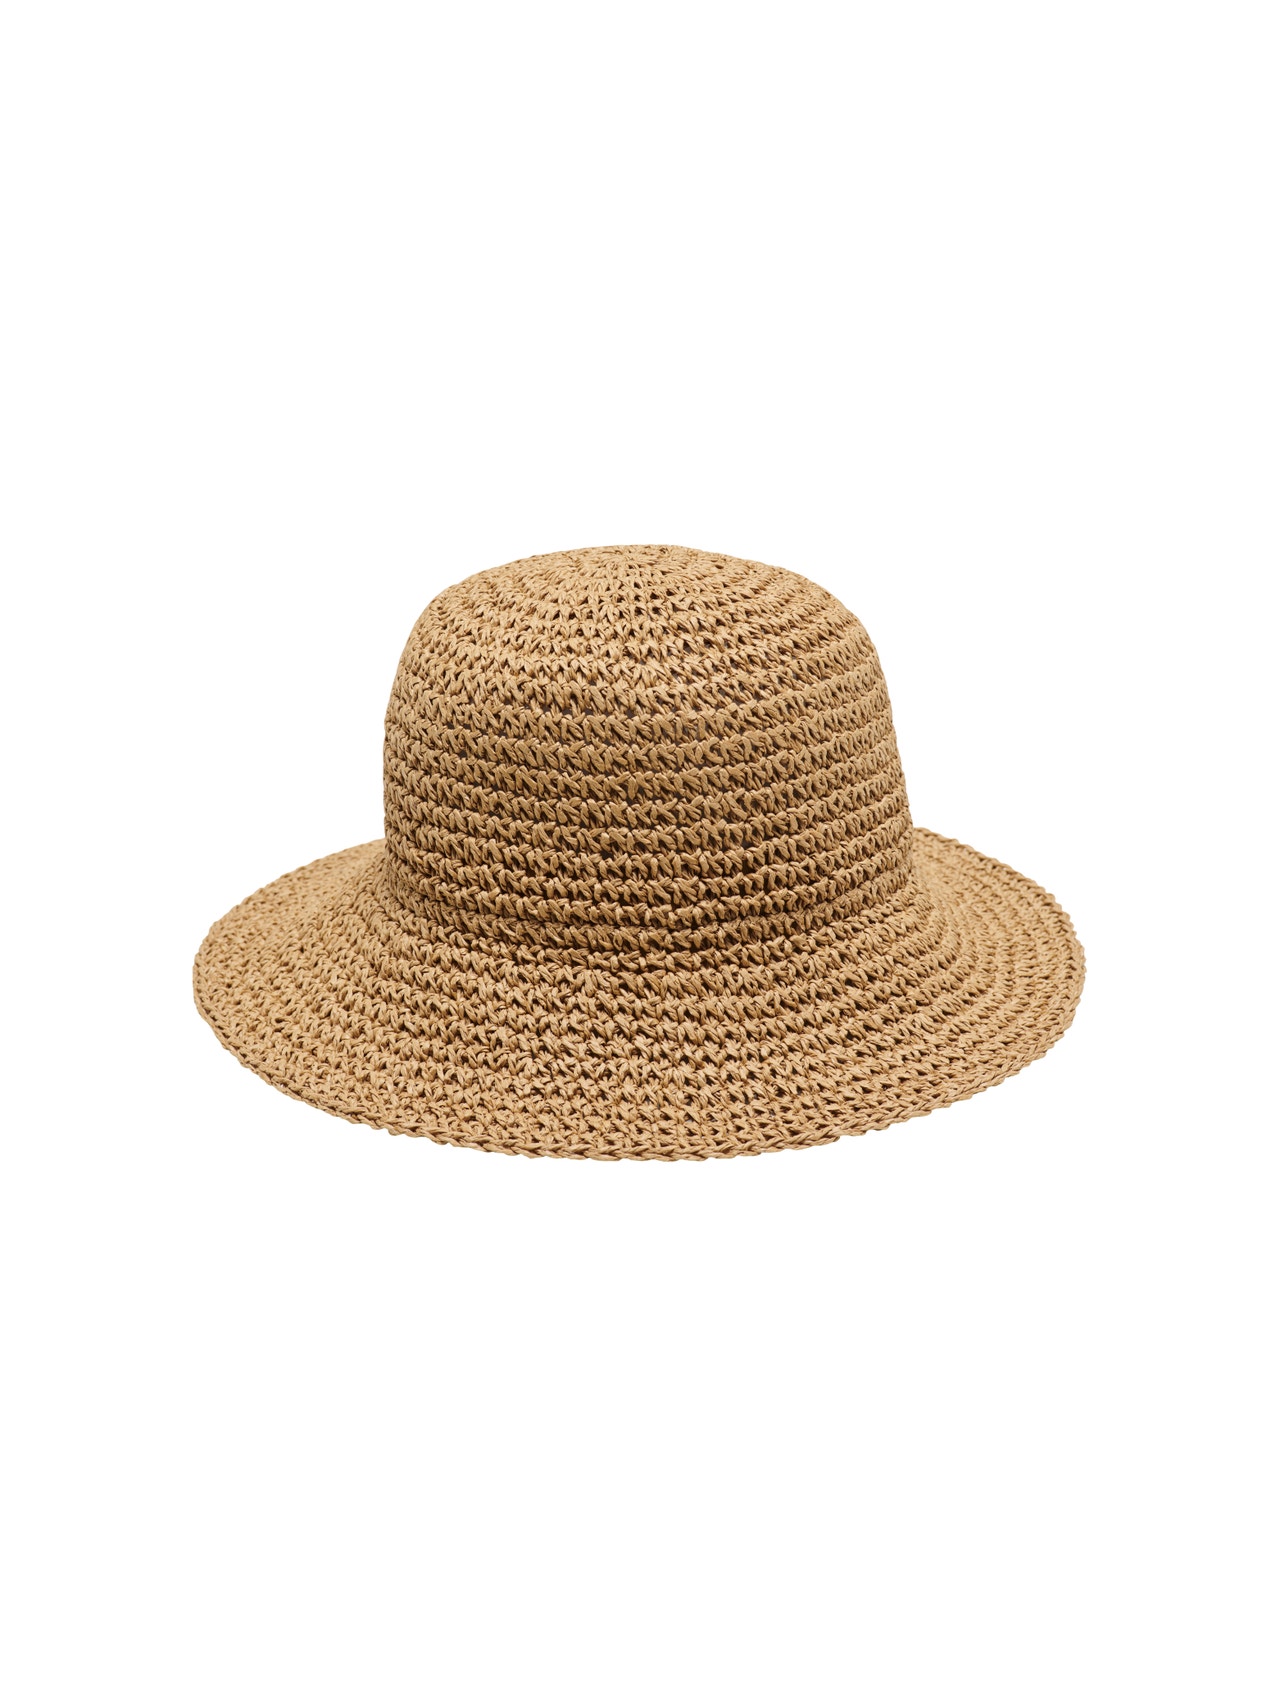 ONLY Beach hat -Toasted Coconut - 15313321